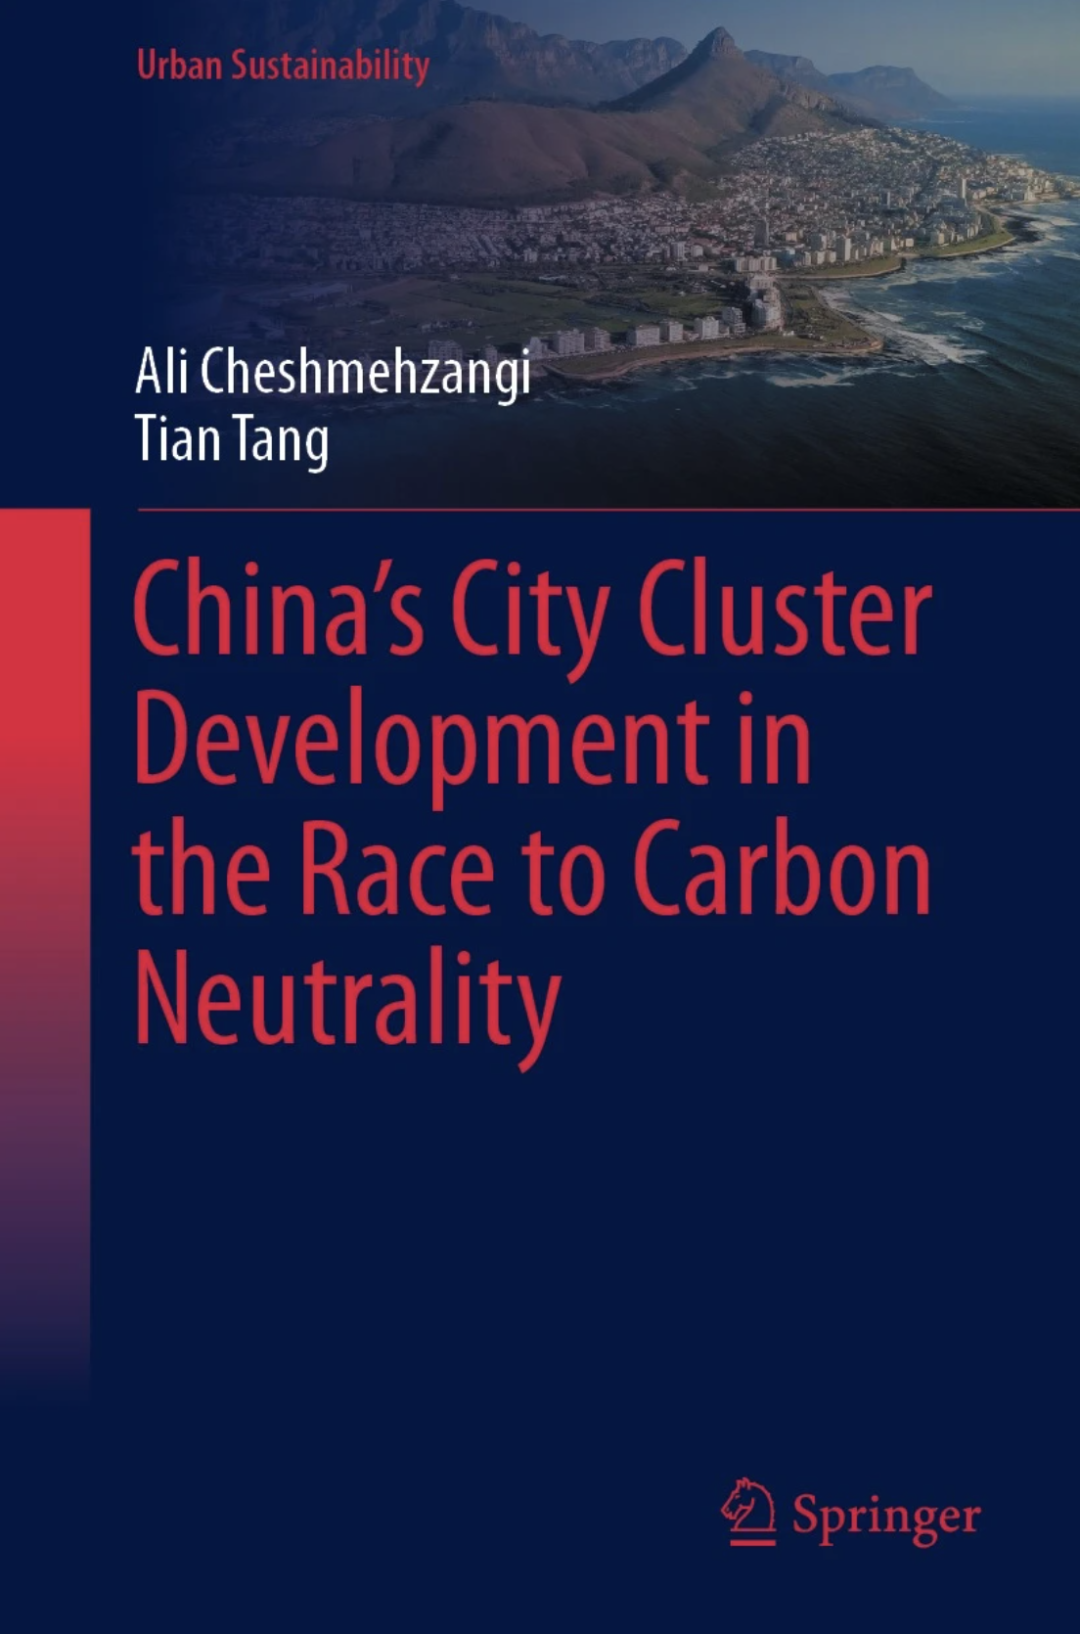  Chinas City Cluster Development in the Race to Carbon Neutrality